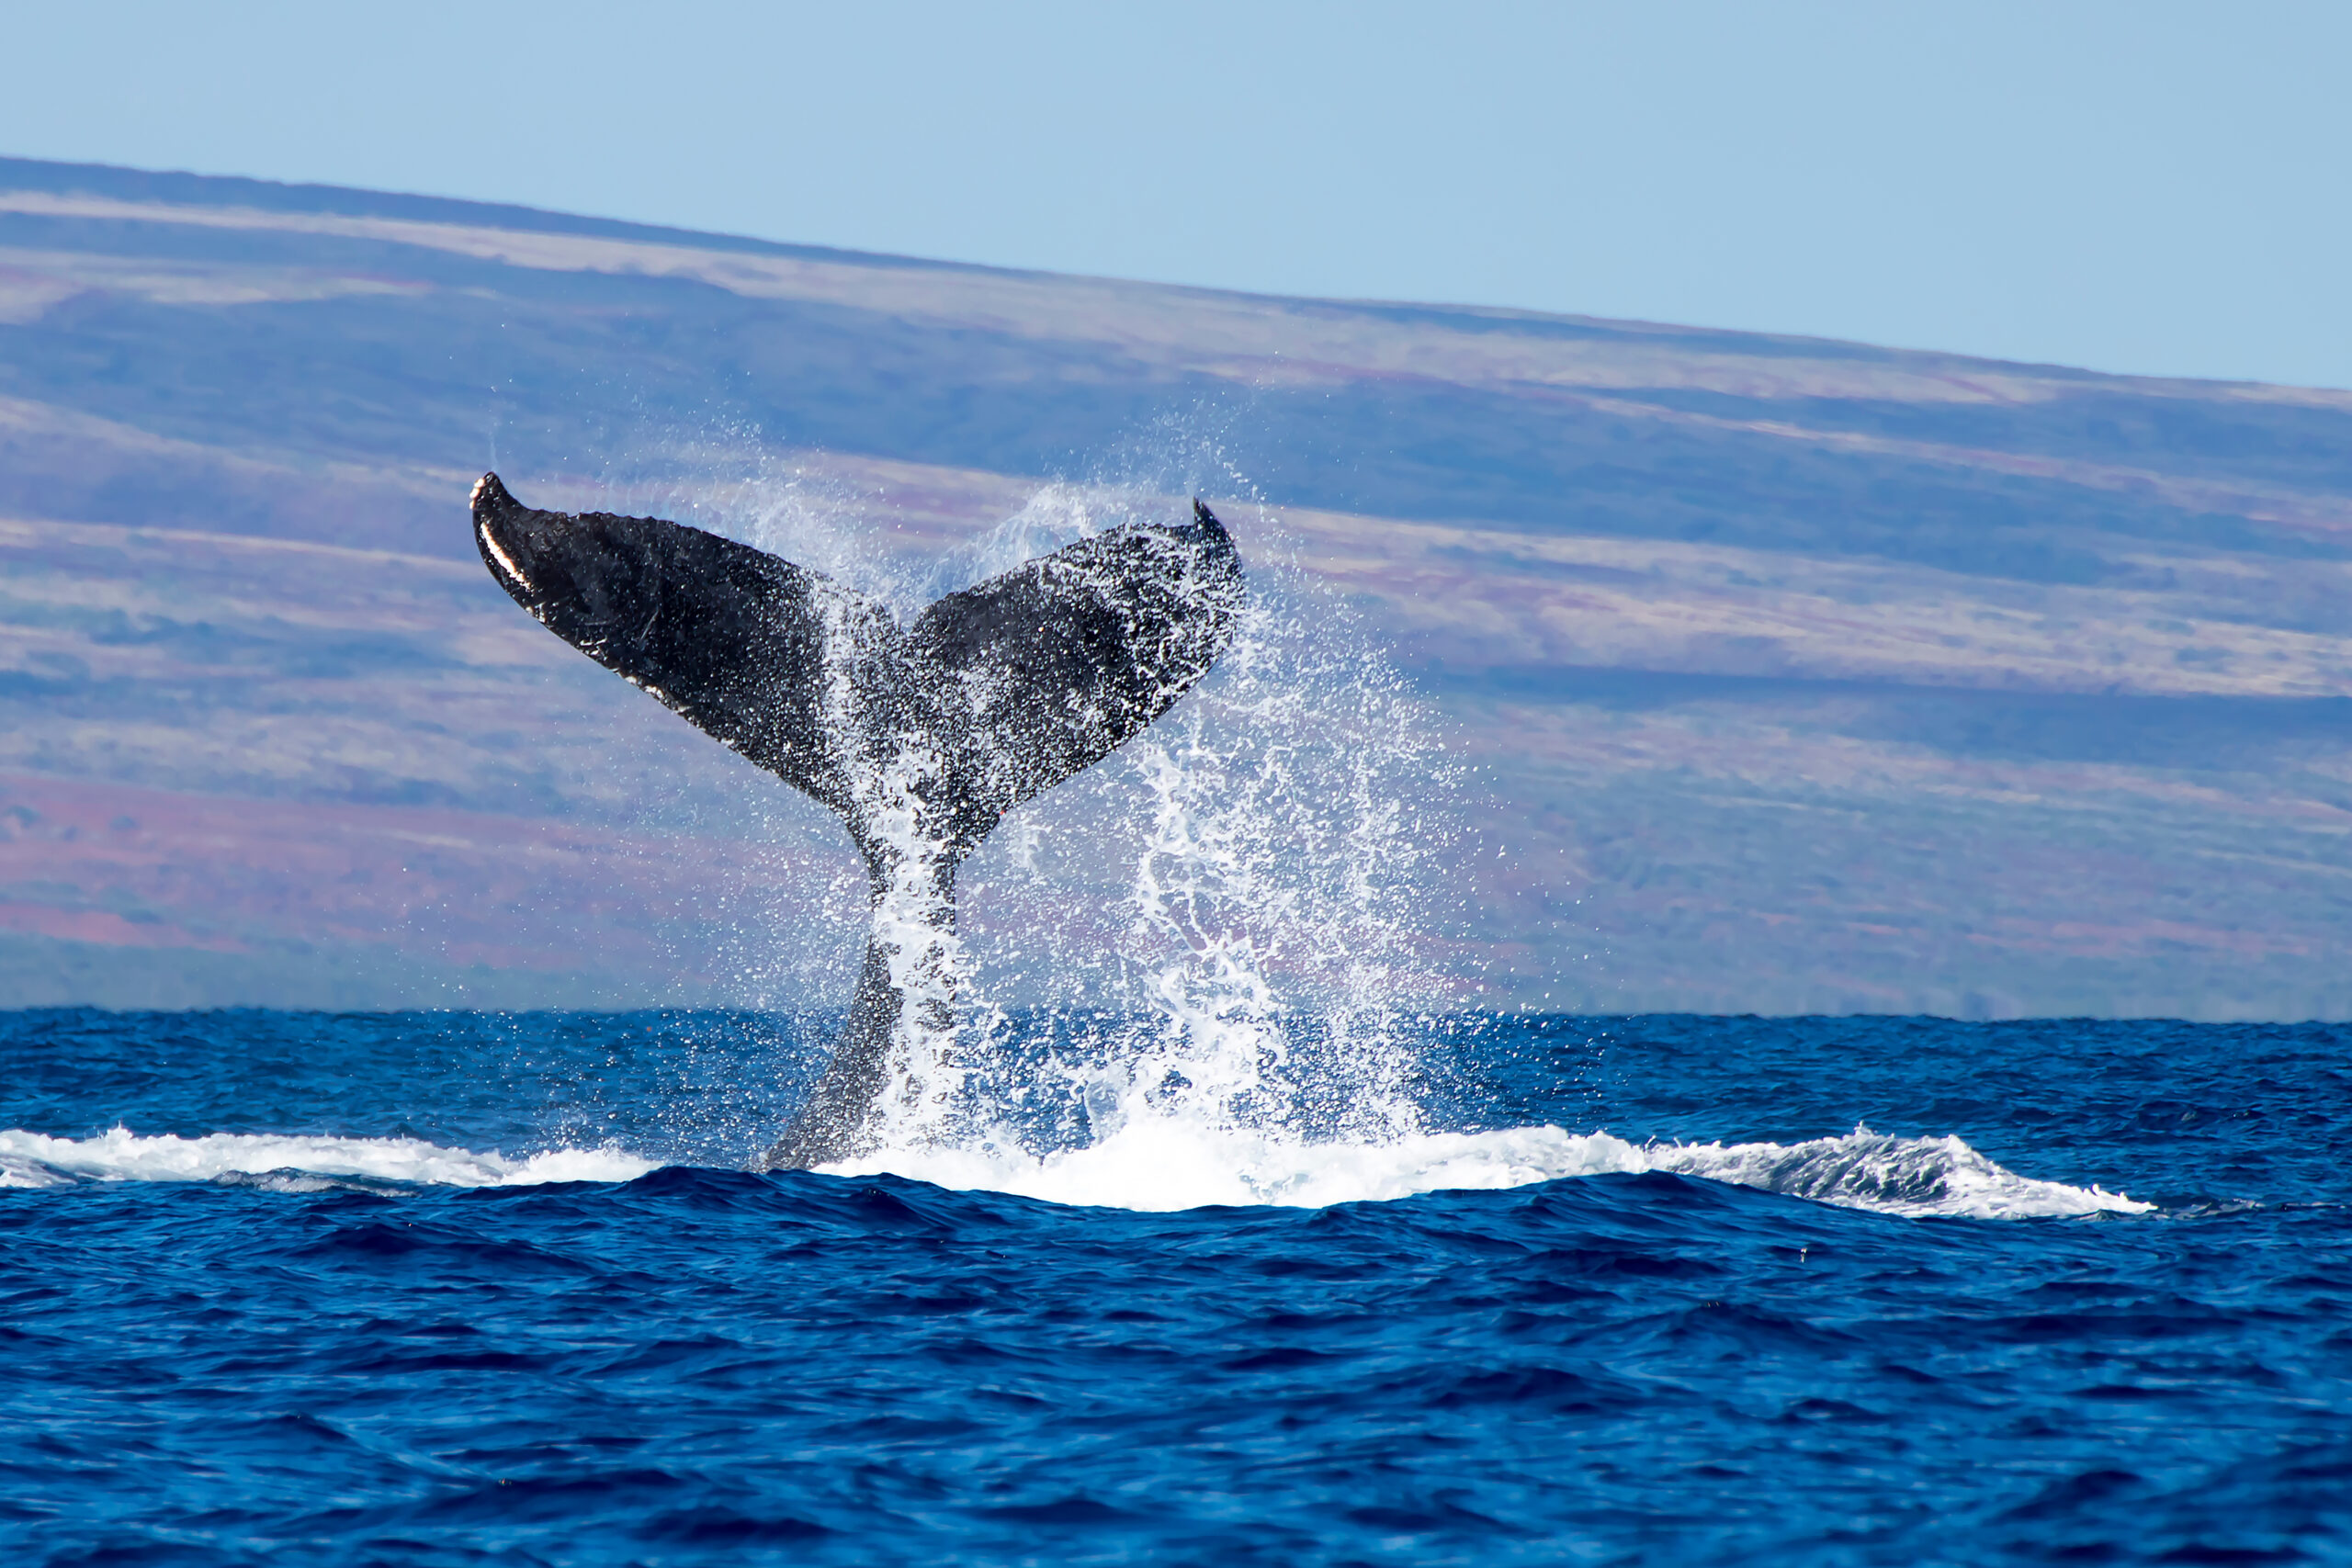 Whale Tail Splashing Water in Ocean with Island In Background